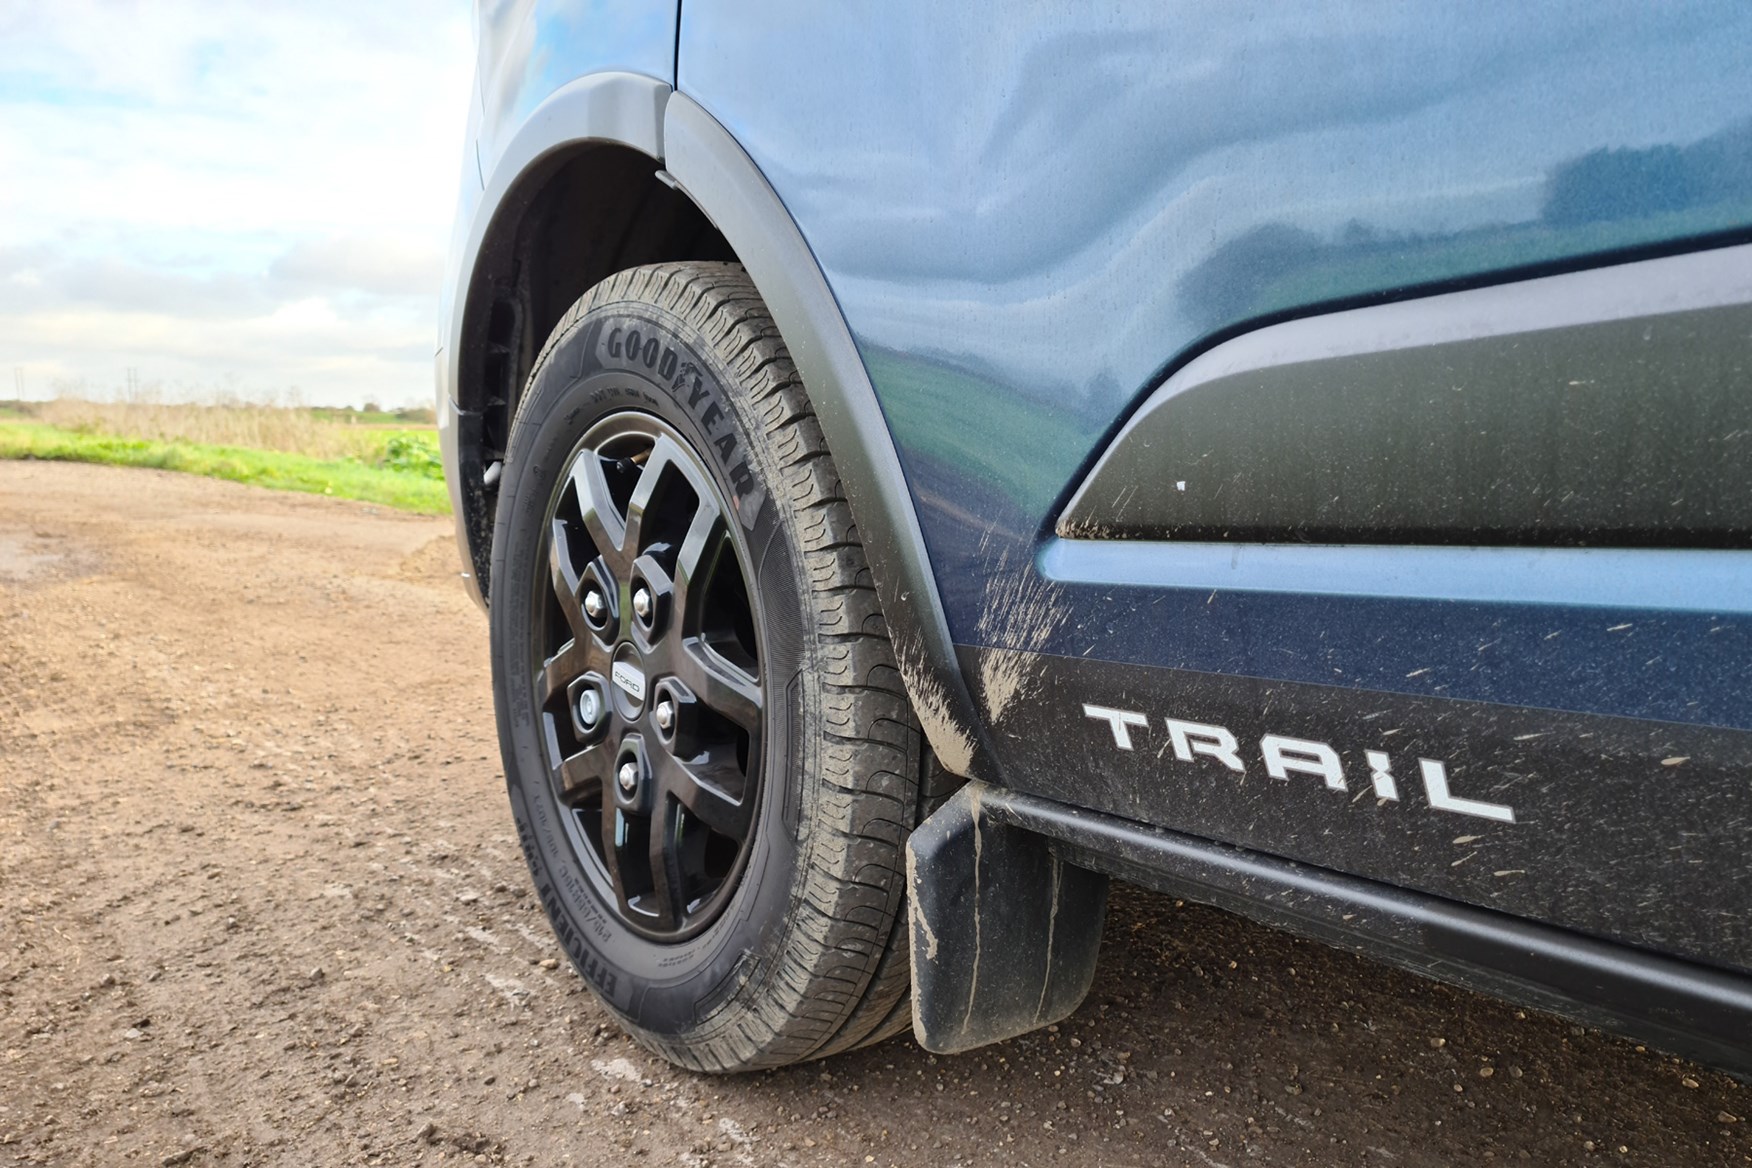 Ford Transit Custom Trail review, L2, DCiV, 2020, Trail logo, mudflaps and 16-inch alloy wheels